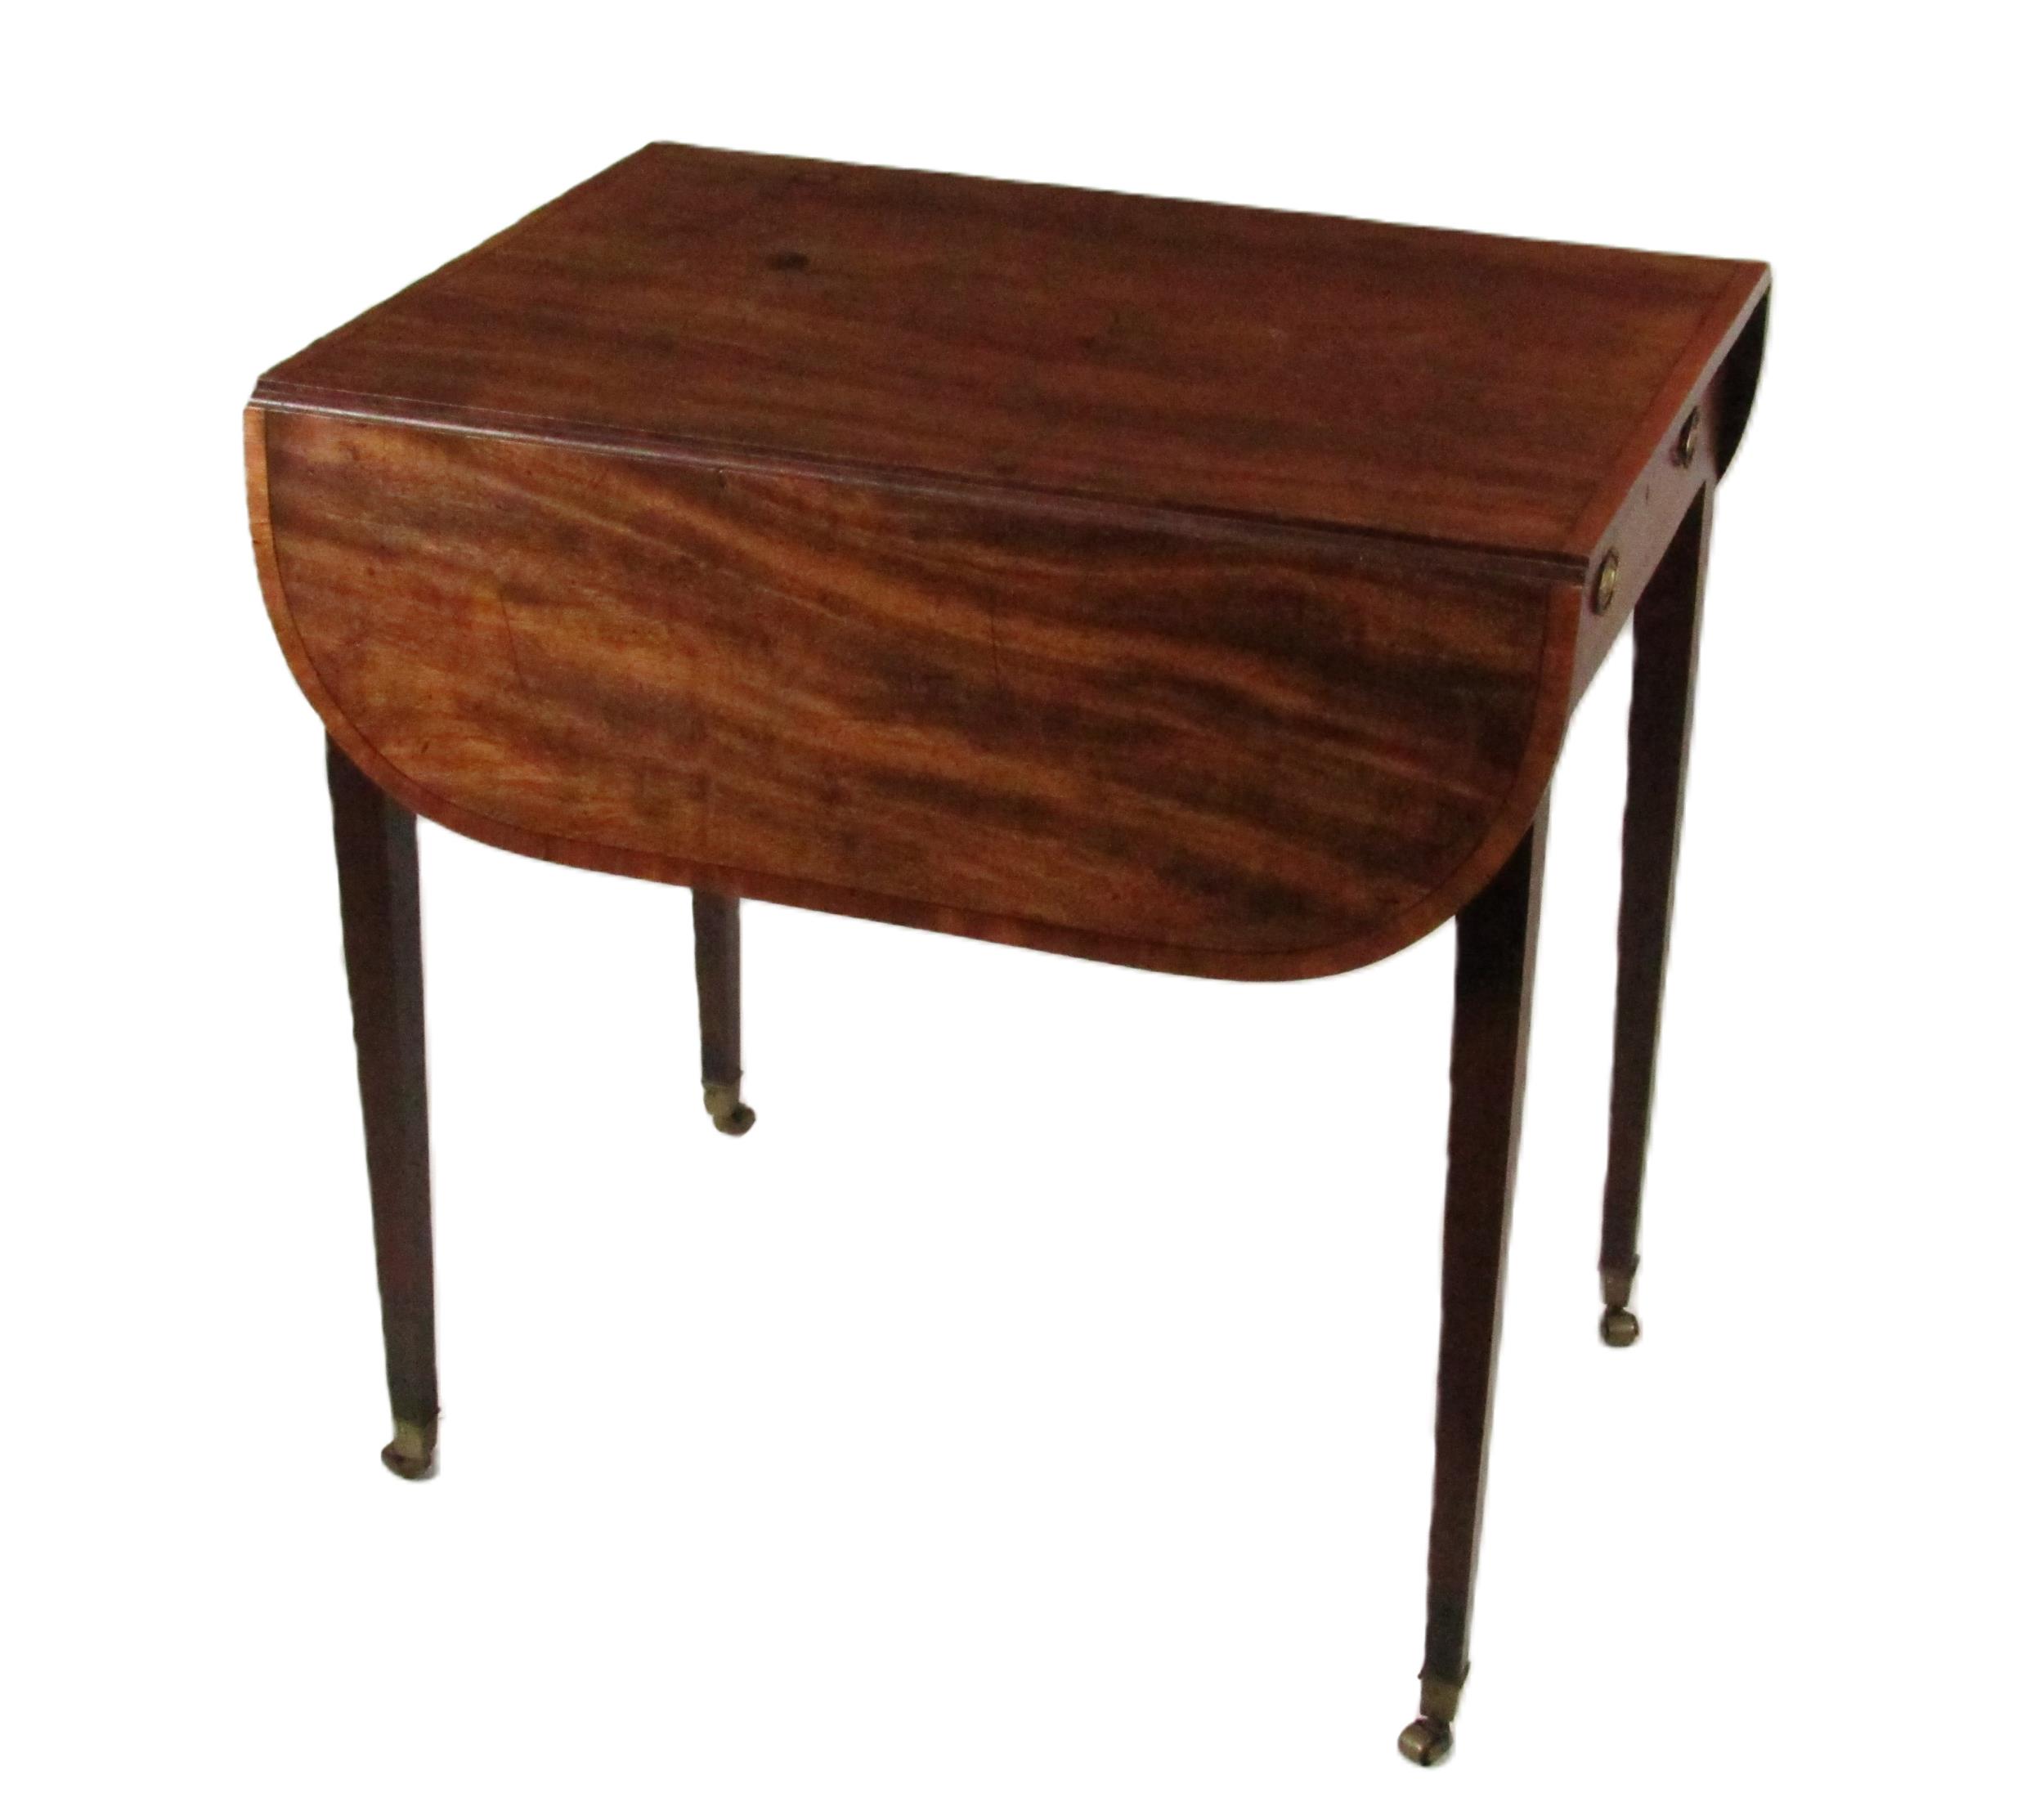 A Regency mahogany Pembroke Table, the top with ebony string inlay and crossbanded border, with demi